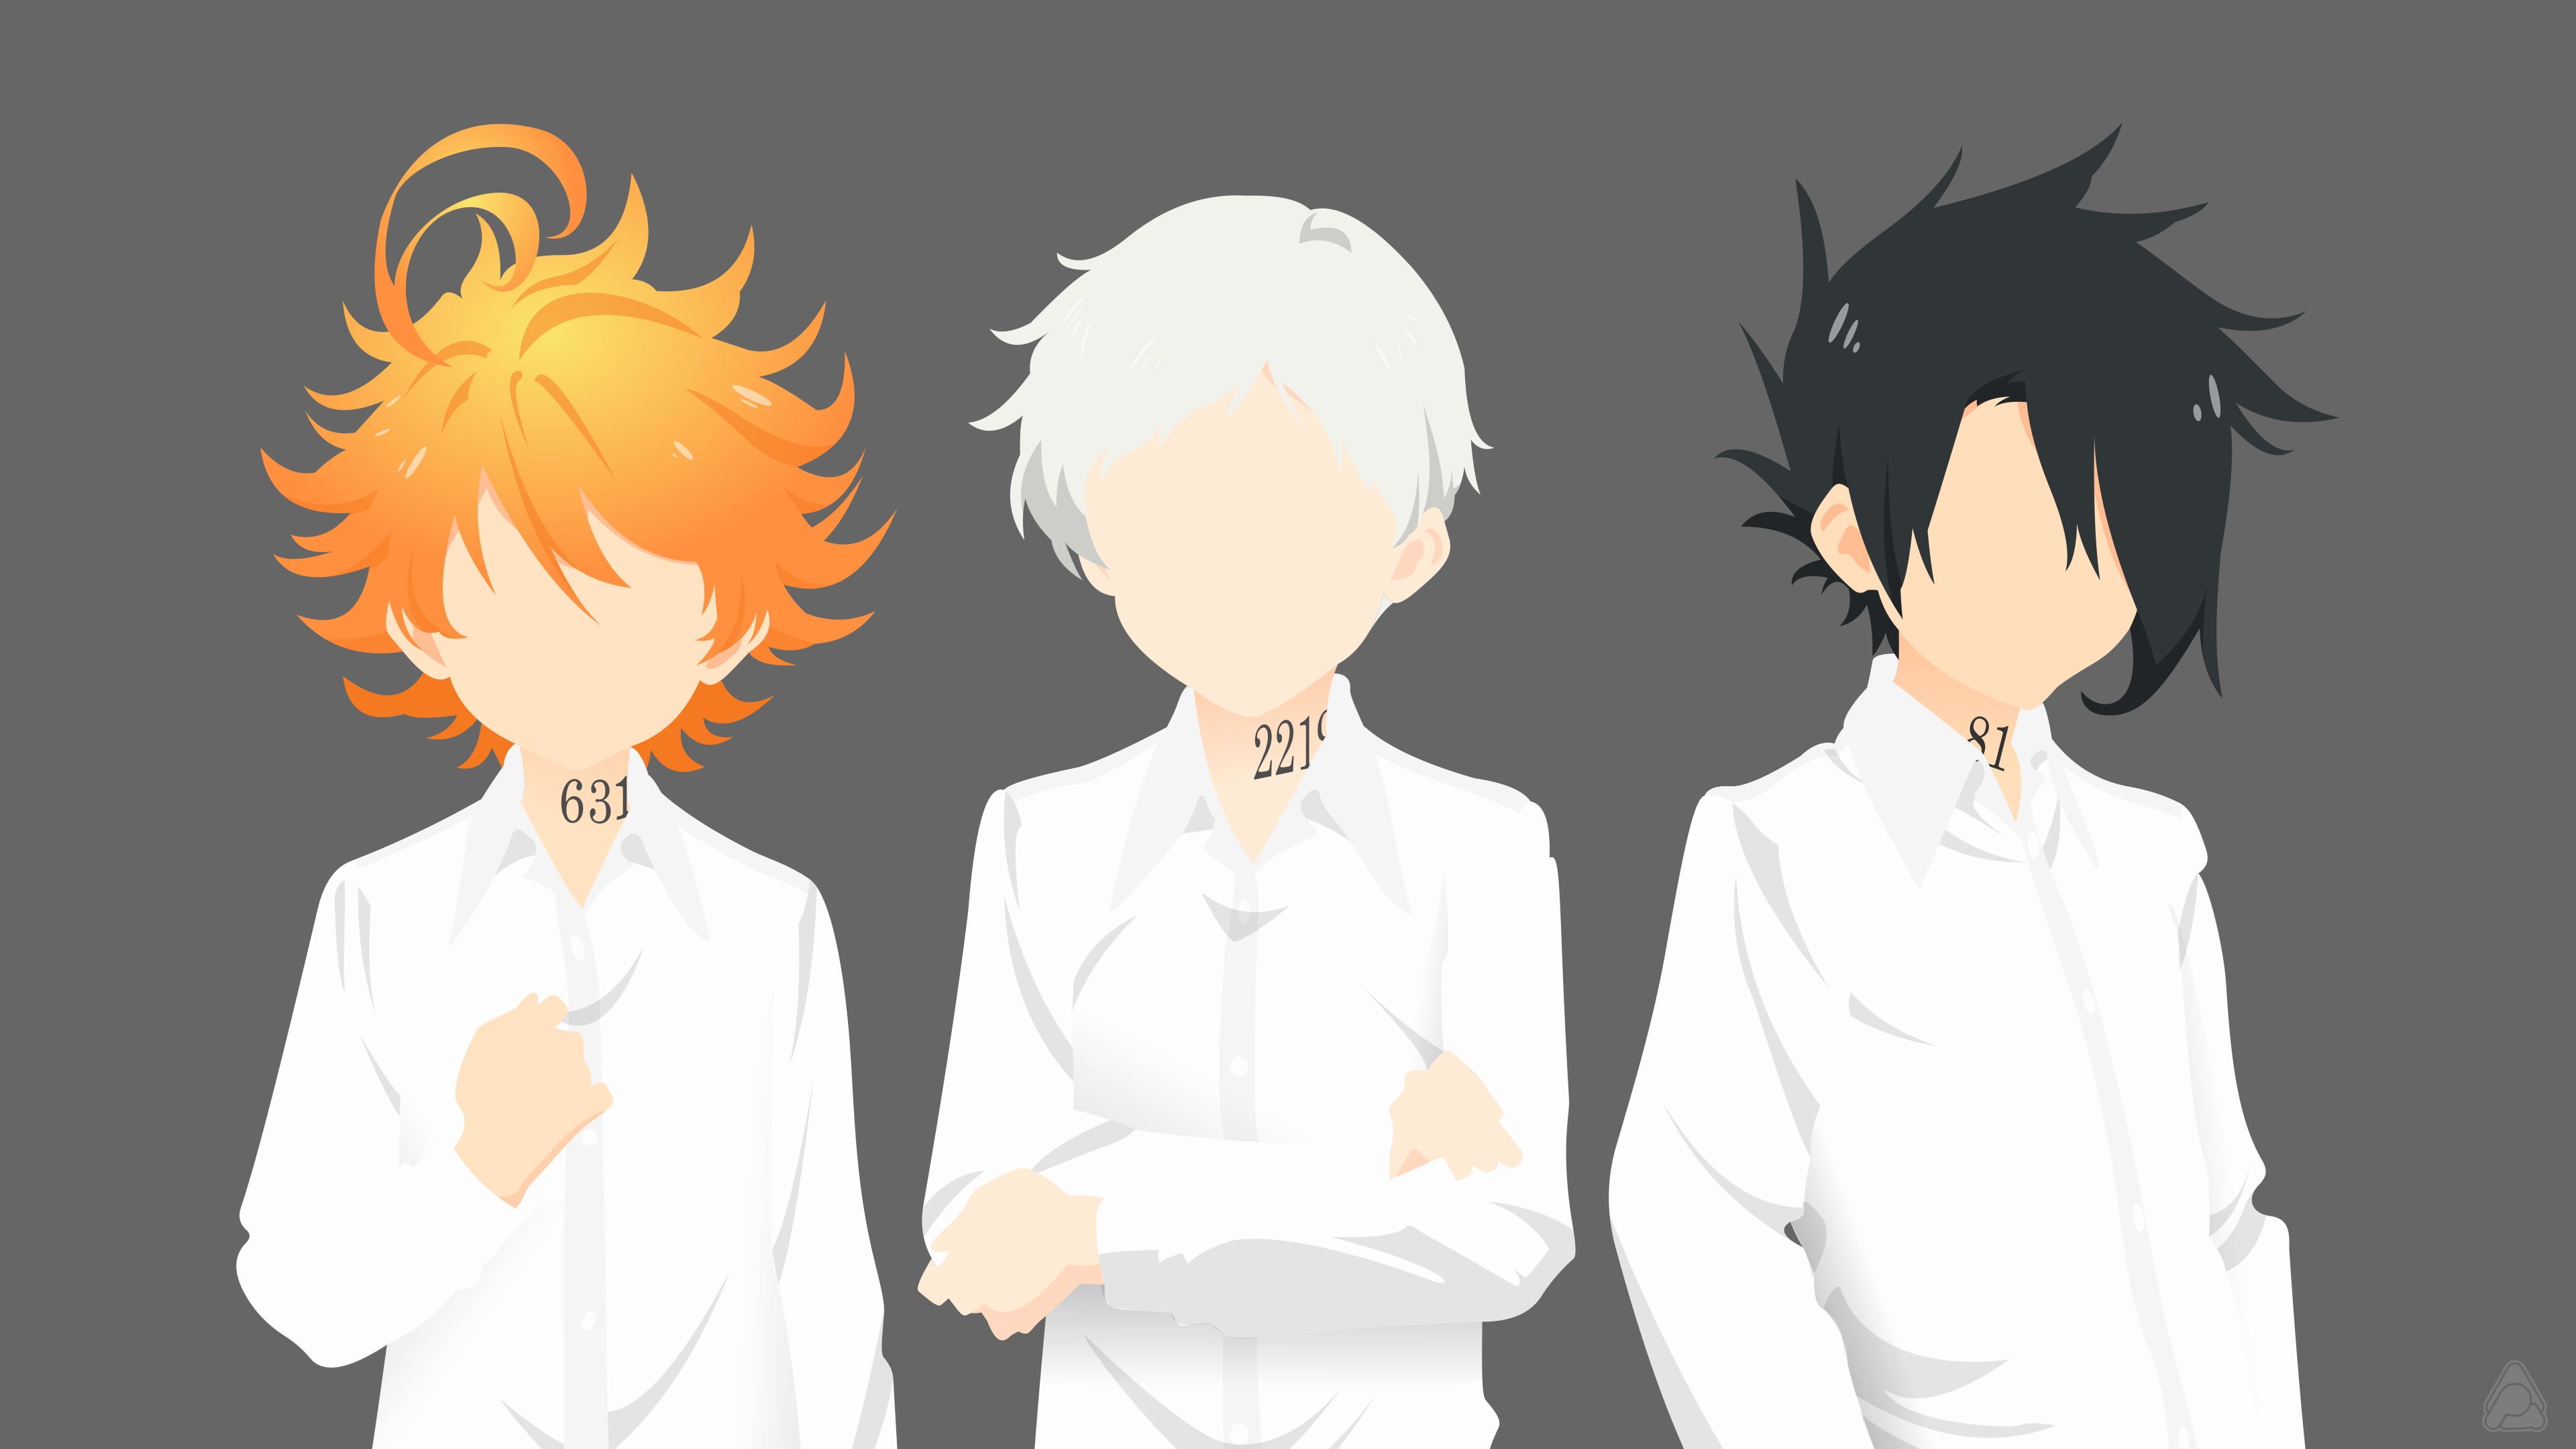 Ray The Promised Neverland Wallpapers Wallpaper Cave 